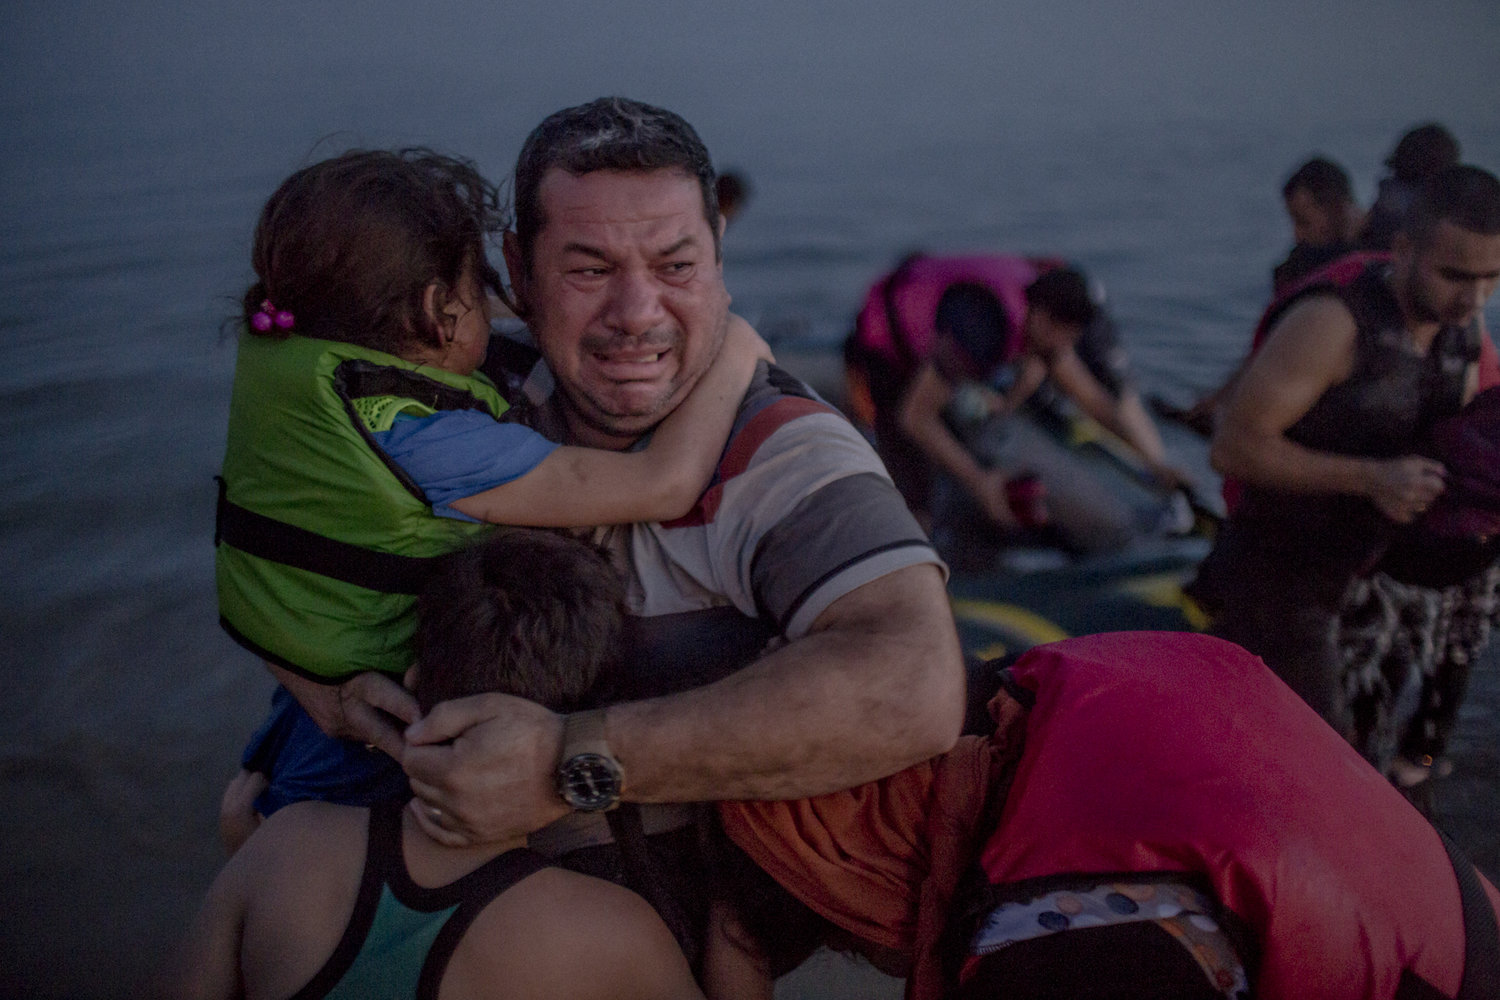 Daniel Etter: Laith Majid Al Amirij, an Iraqi refugee from Baghdad, breaks out in tears of joy, holding his son Taha and his daughter Nour, after they arrived safely on a beach of the Greek island of Kos, Greece, Aug. 15, 2015. The group crossed over from the Turkish resort town of Bodrum and on the way their flimsy rubber boat, crammed with about 12 men, women and children, lost air. Fearing that they get sent back to Turkey and upon being told so by their smuggler, Mr. Al Amirij’s wife initially identified them as Syrians from Deir Ezzor. The family has since made it to Berlin, Germany.